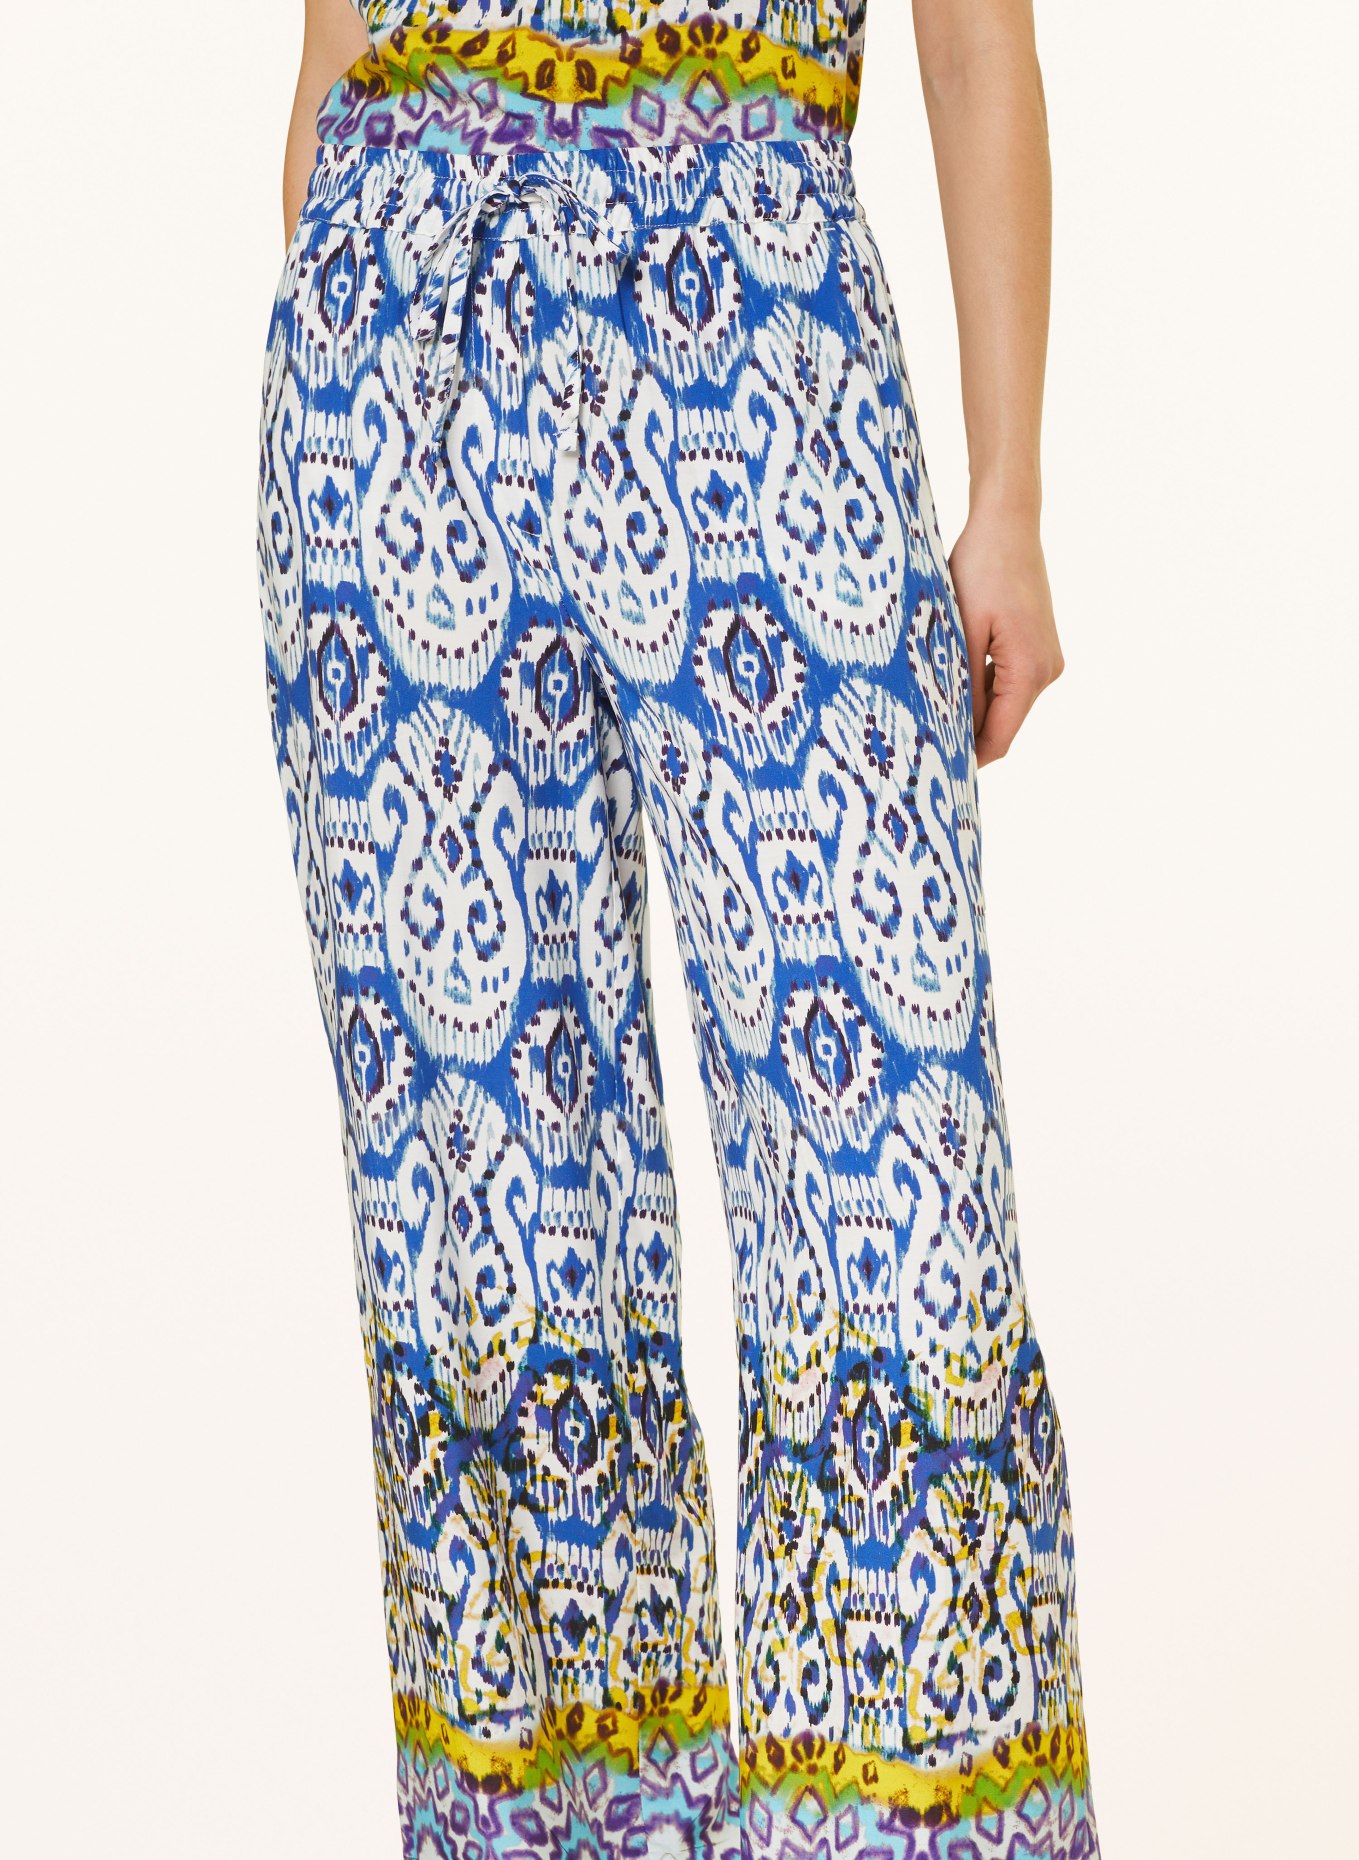 Emily VAN DEN BERGH Pants in jogger style, Color: BLUE/ WHITE/ YELLOW (Image 5)